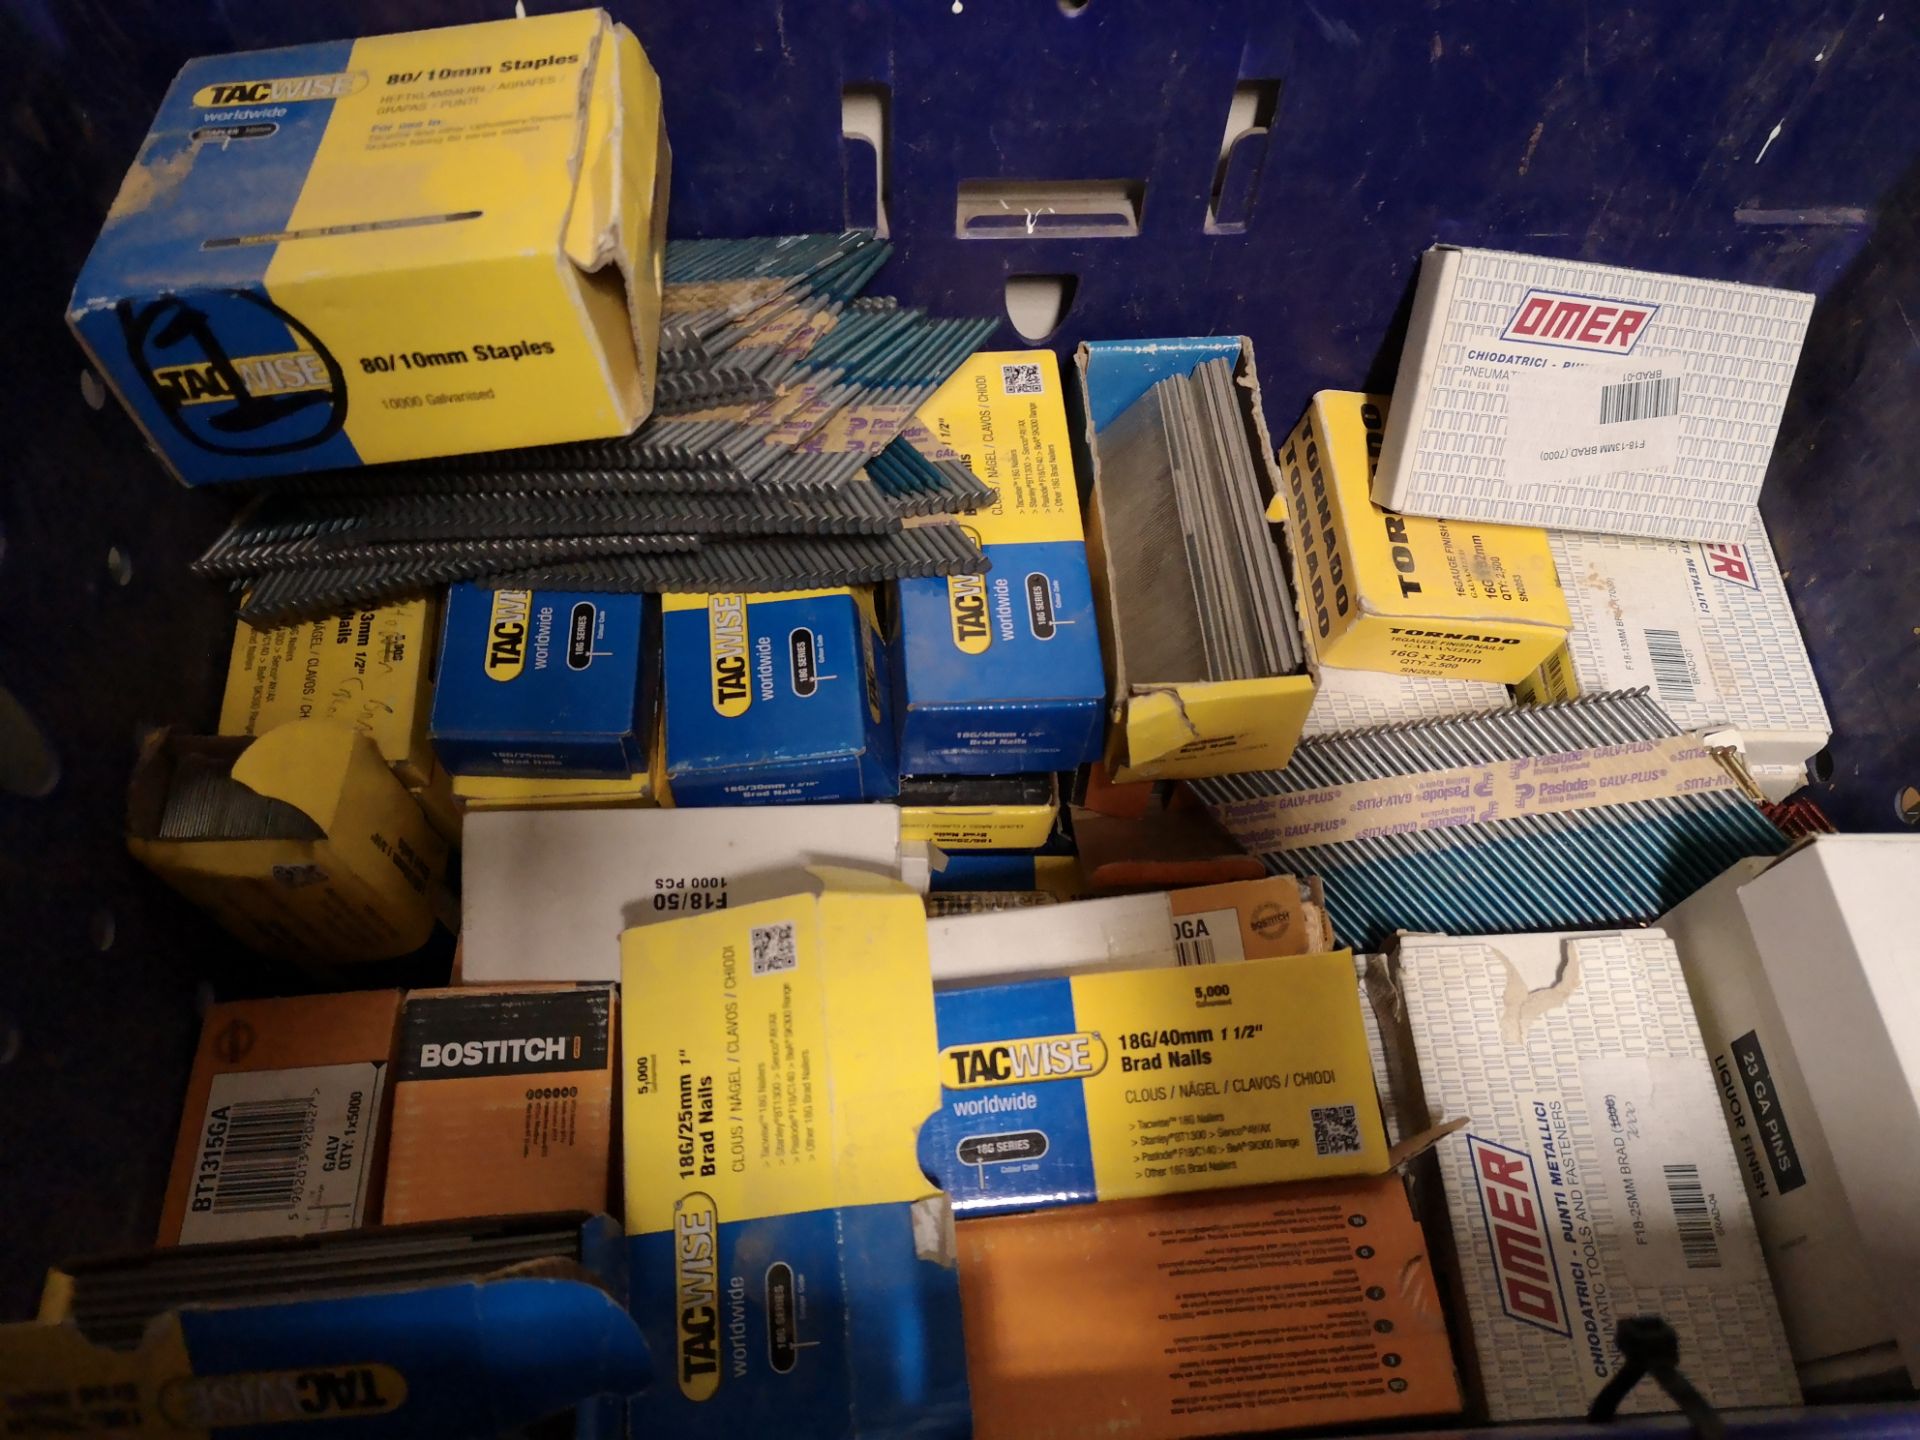 Quantity of Brad Nails, Staples Including Bostich, Tacwise, Omer As Set Out in One Box - Image 2 of 2